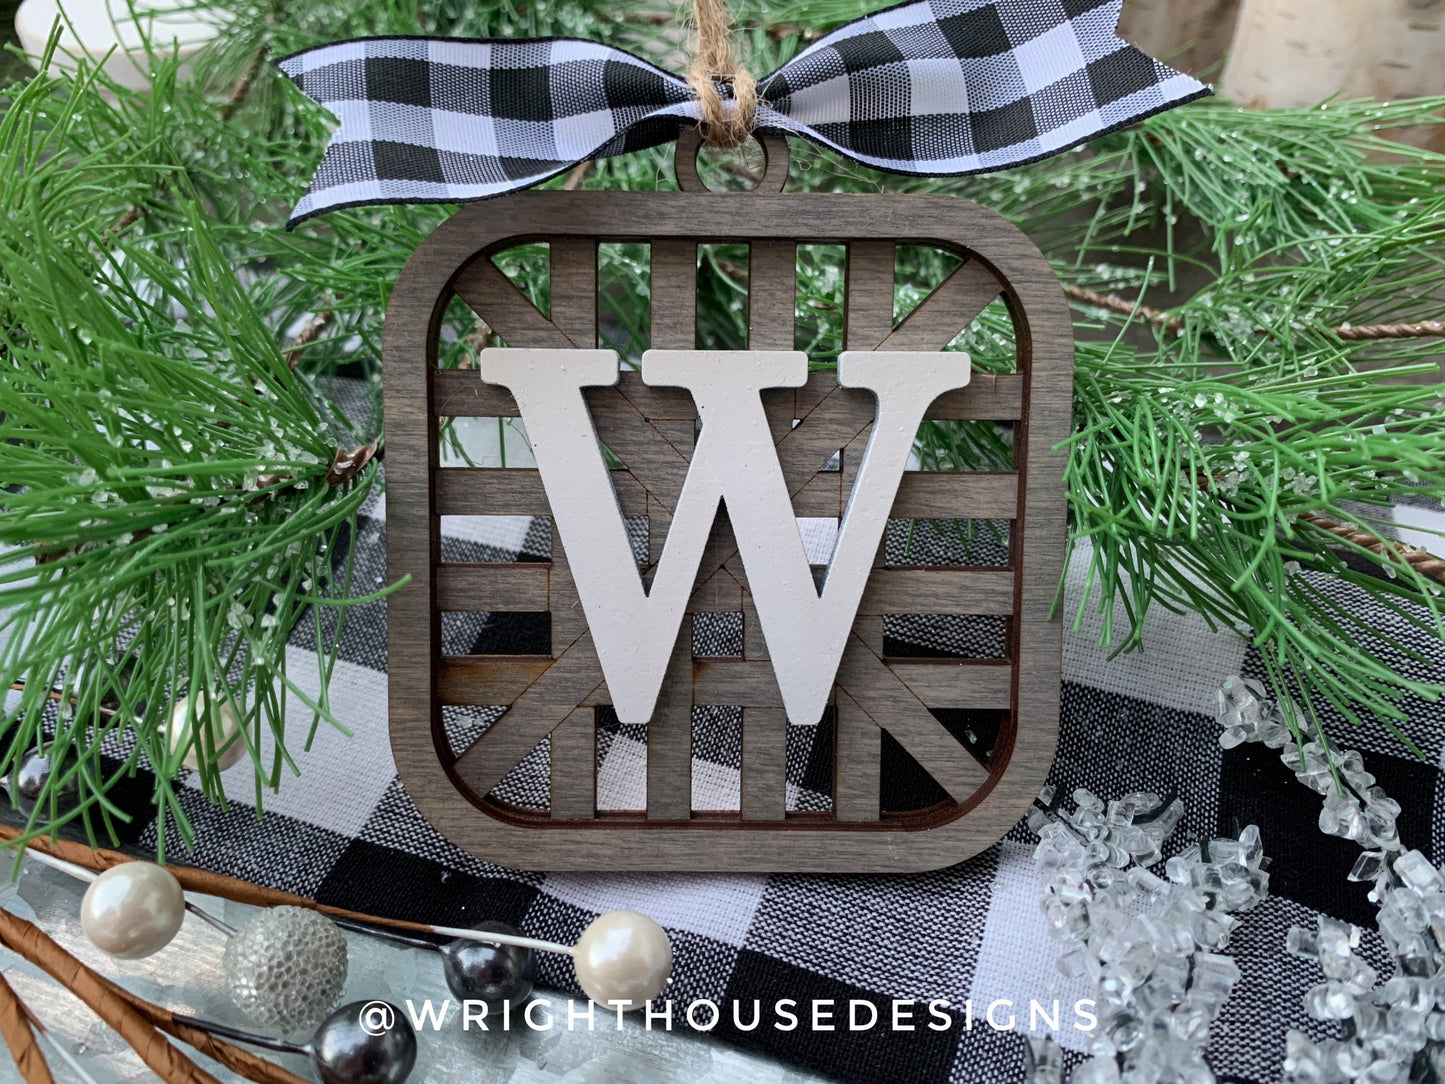 Wooden Tabacco Basket - Personalized Monogram - Rustic Farmhouse Christmas Tree Ornament - Stocking Tags - Stained Wood - Holiday Decor